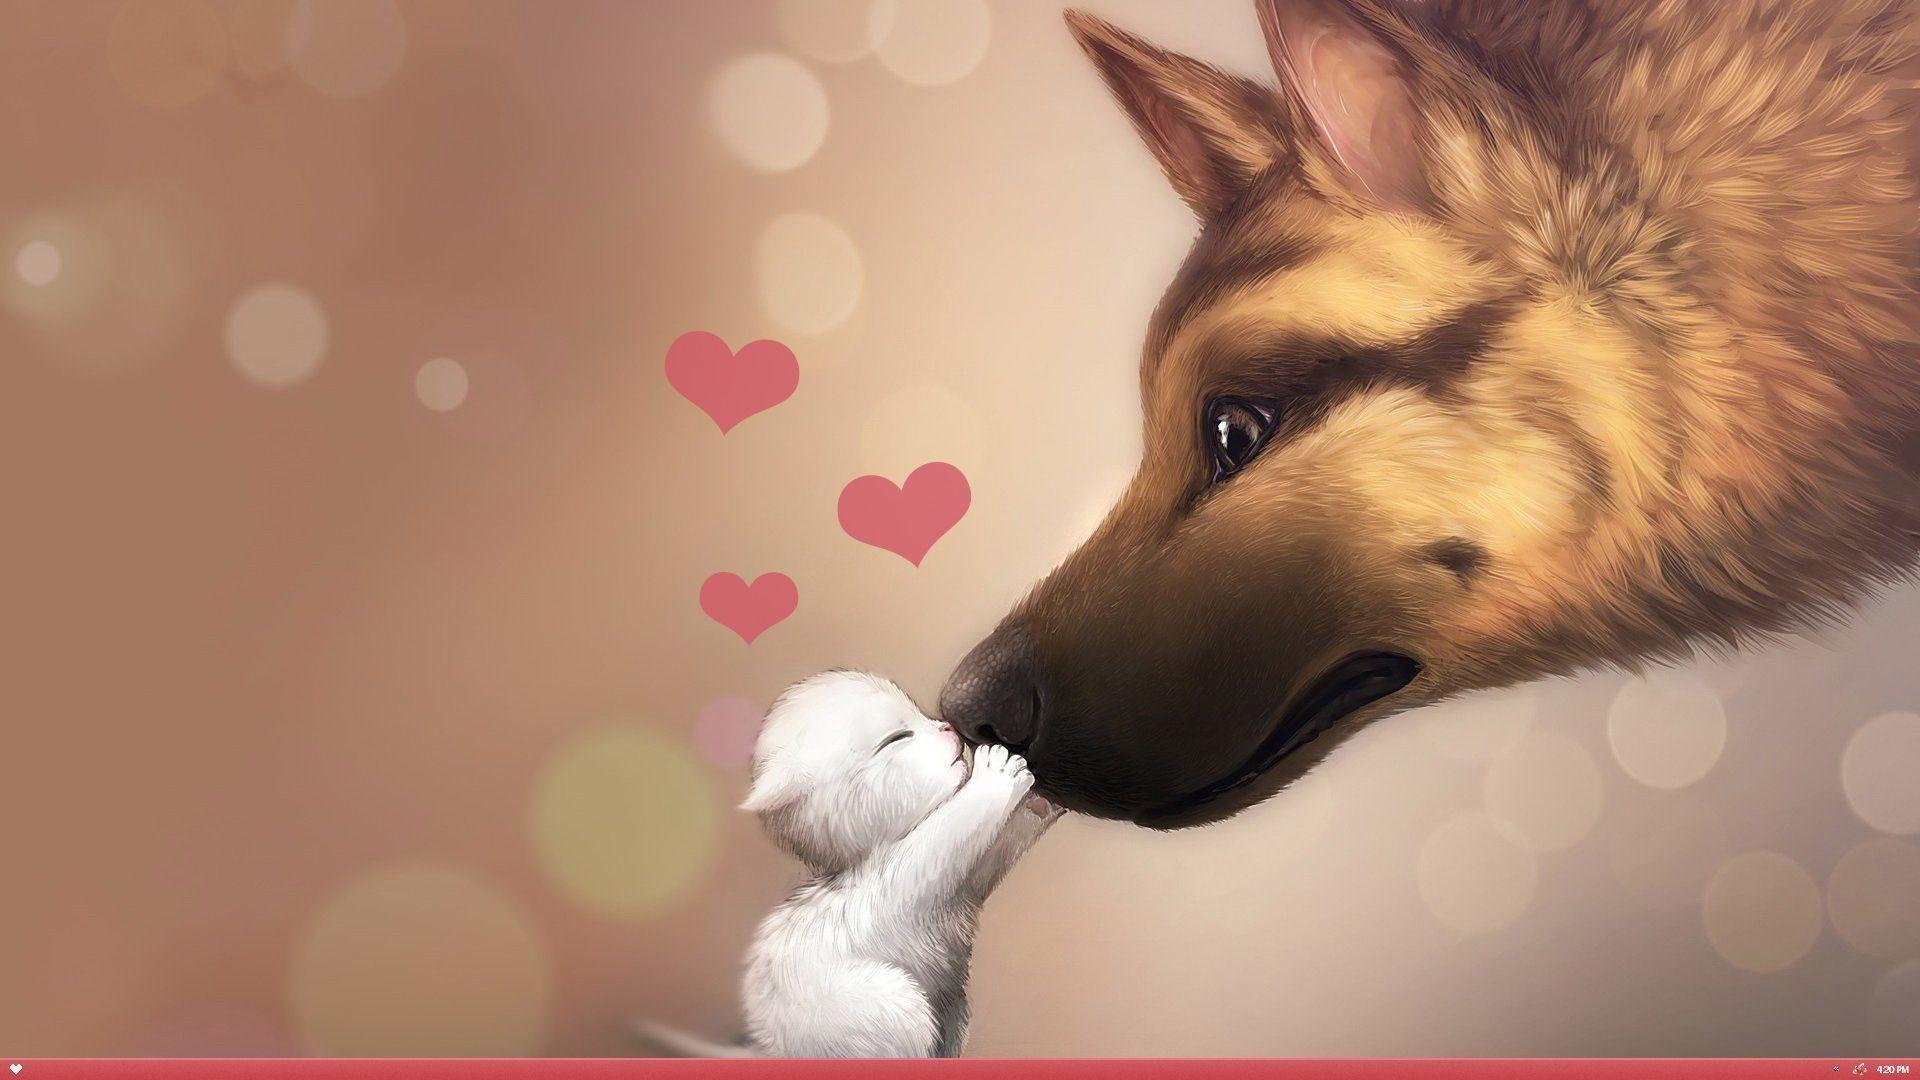 Cute Valentine Animals Wallpapers - Wallpaper Cave